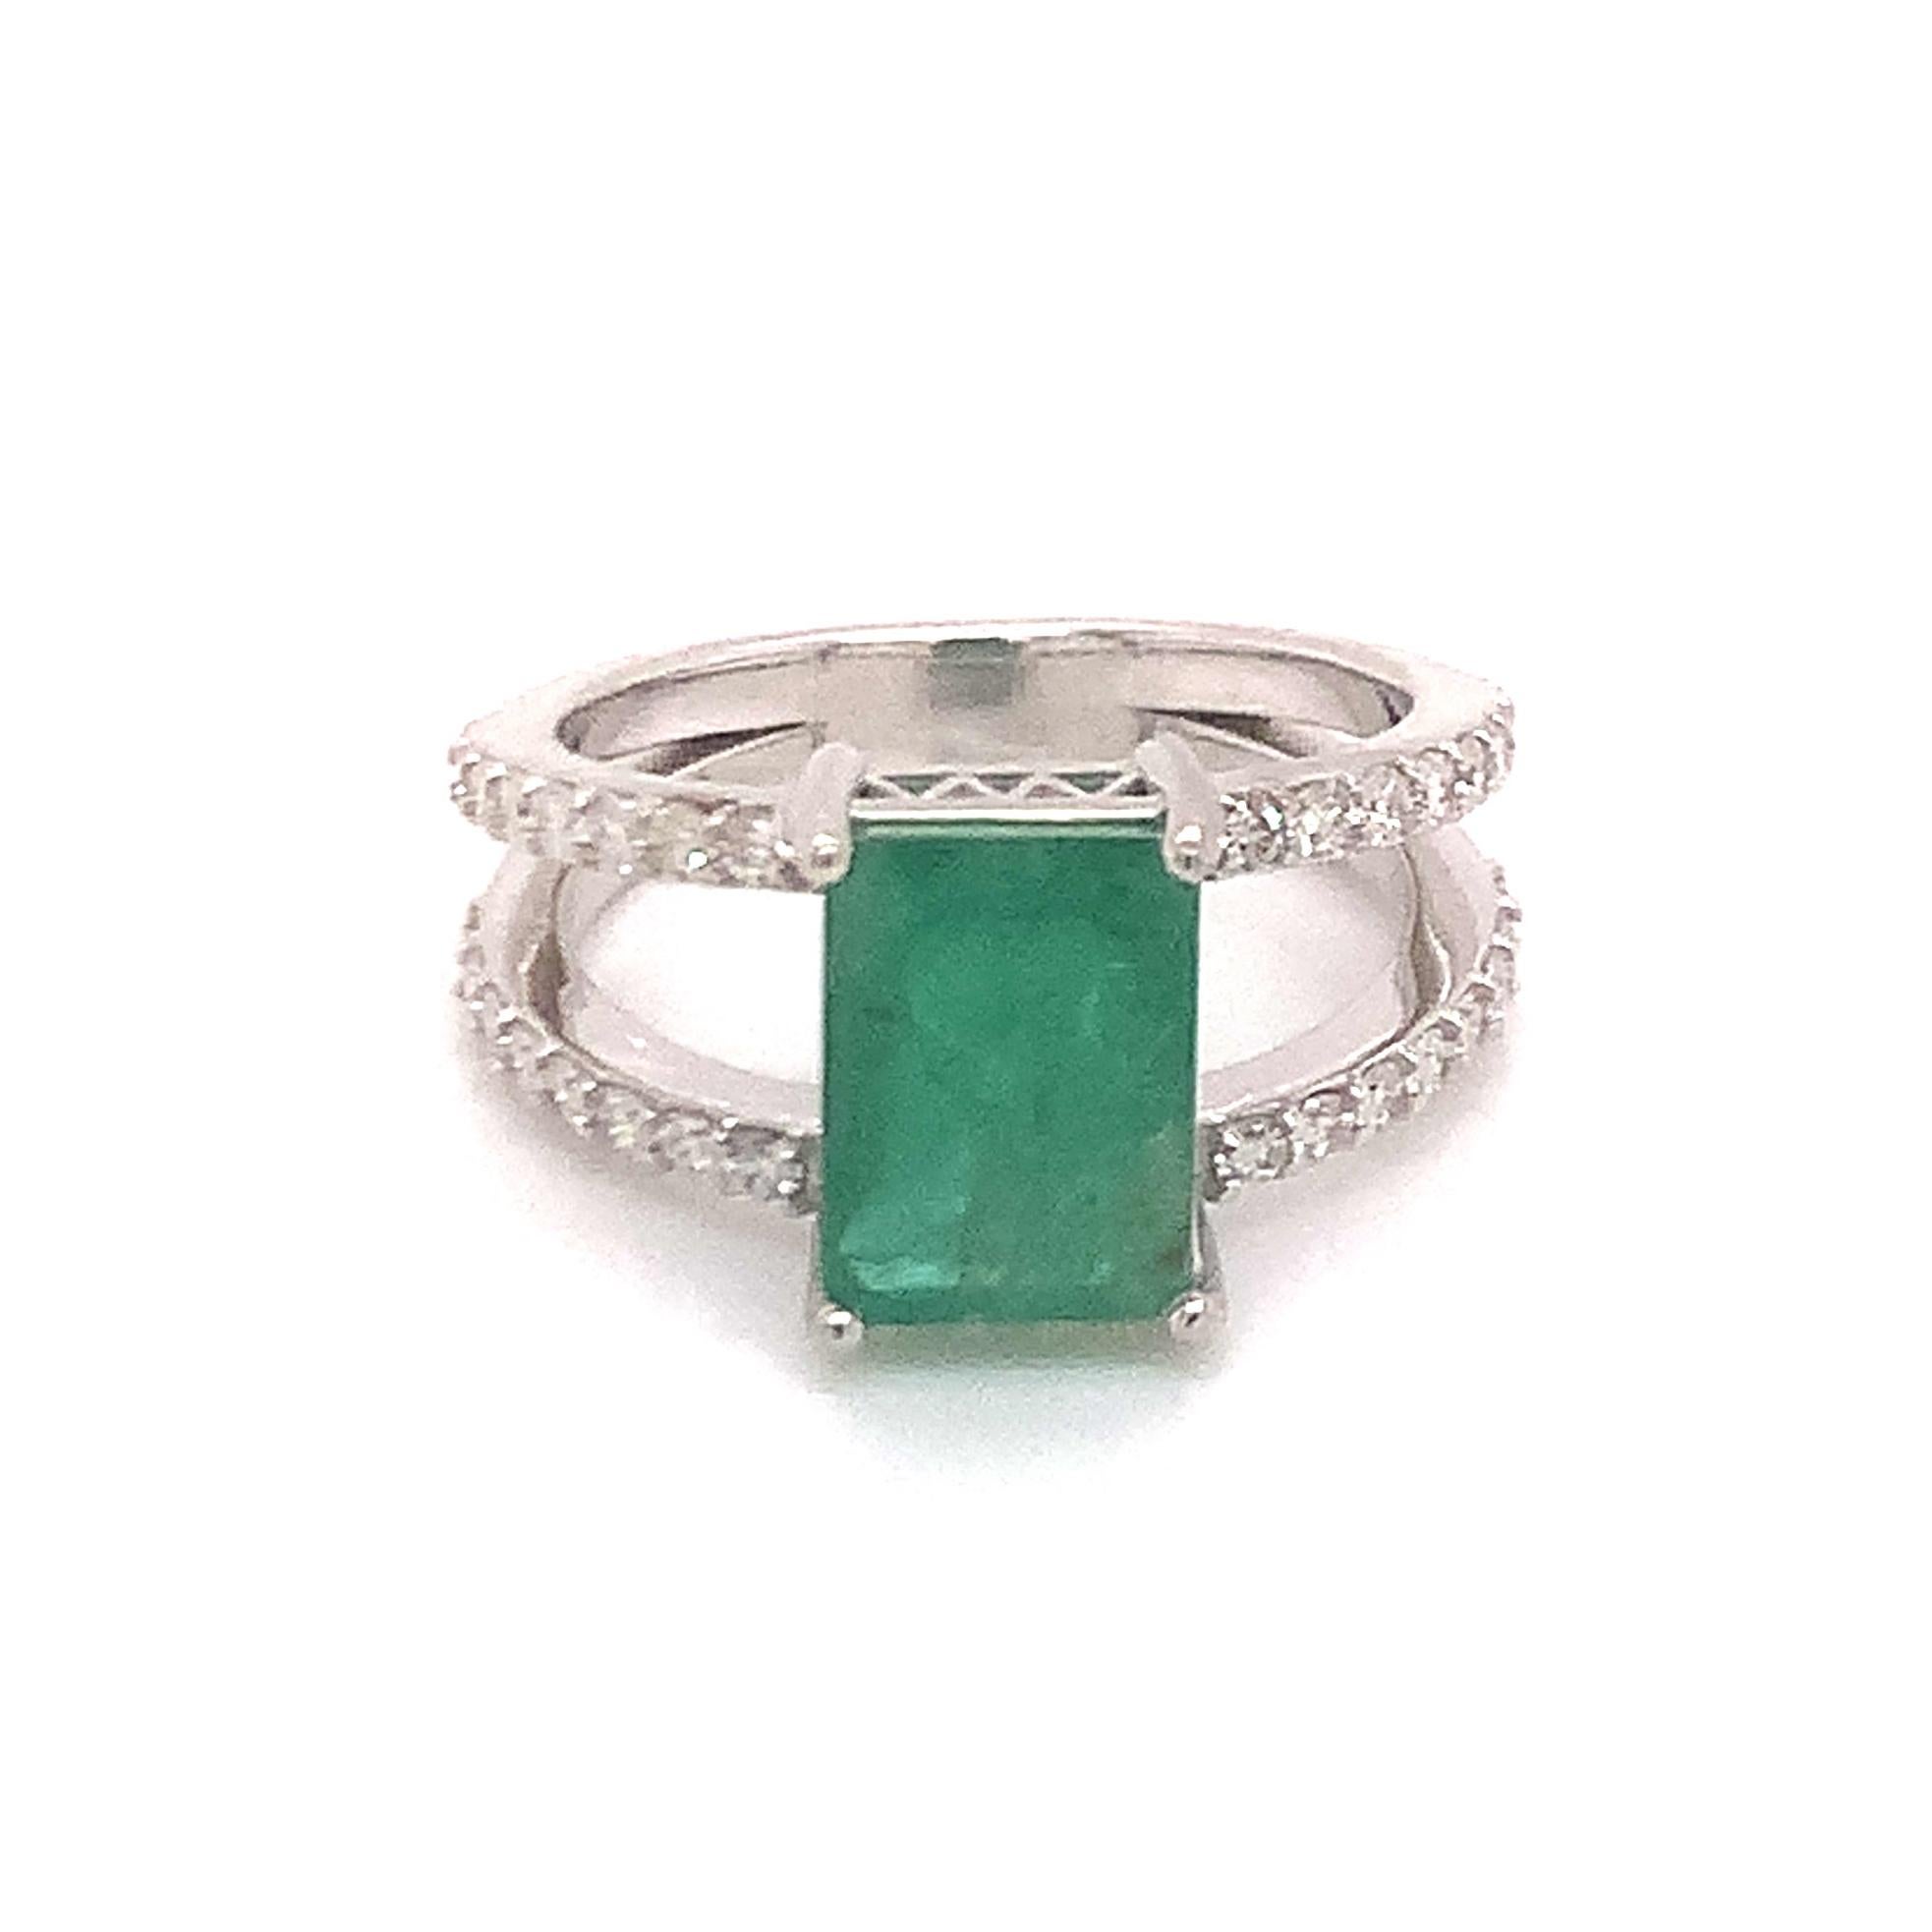 Natural Emerald Diamond Ring 14k Gold 2.85 TCW Certified For Sale 4